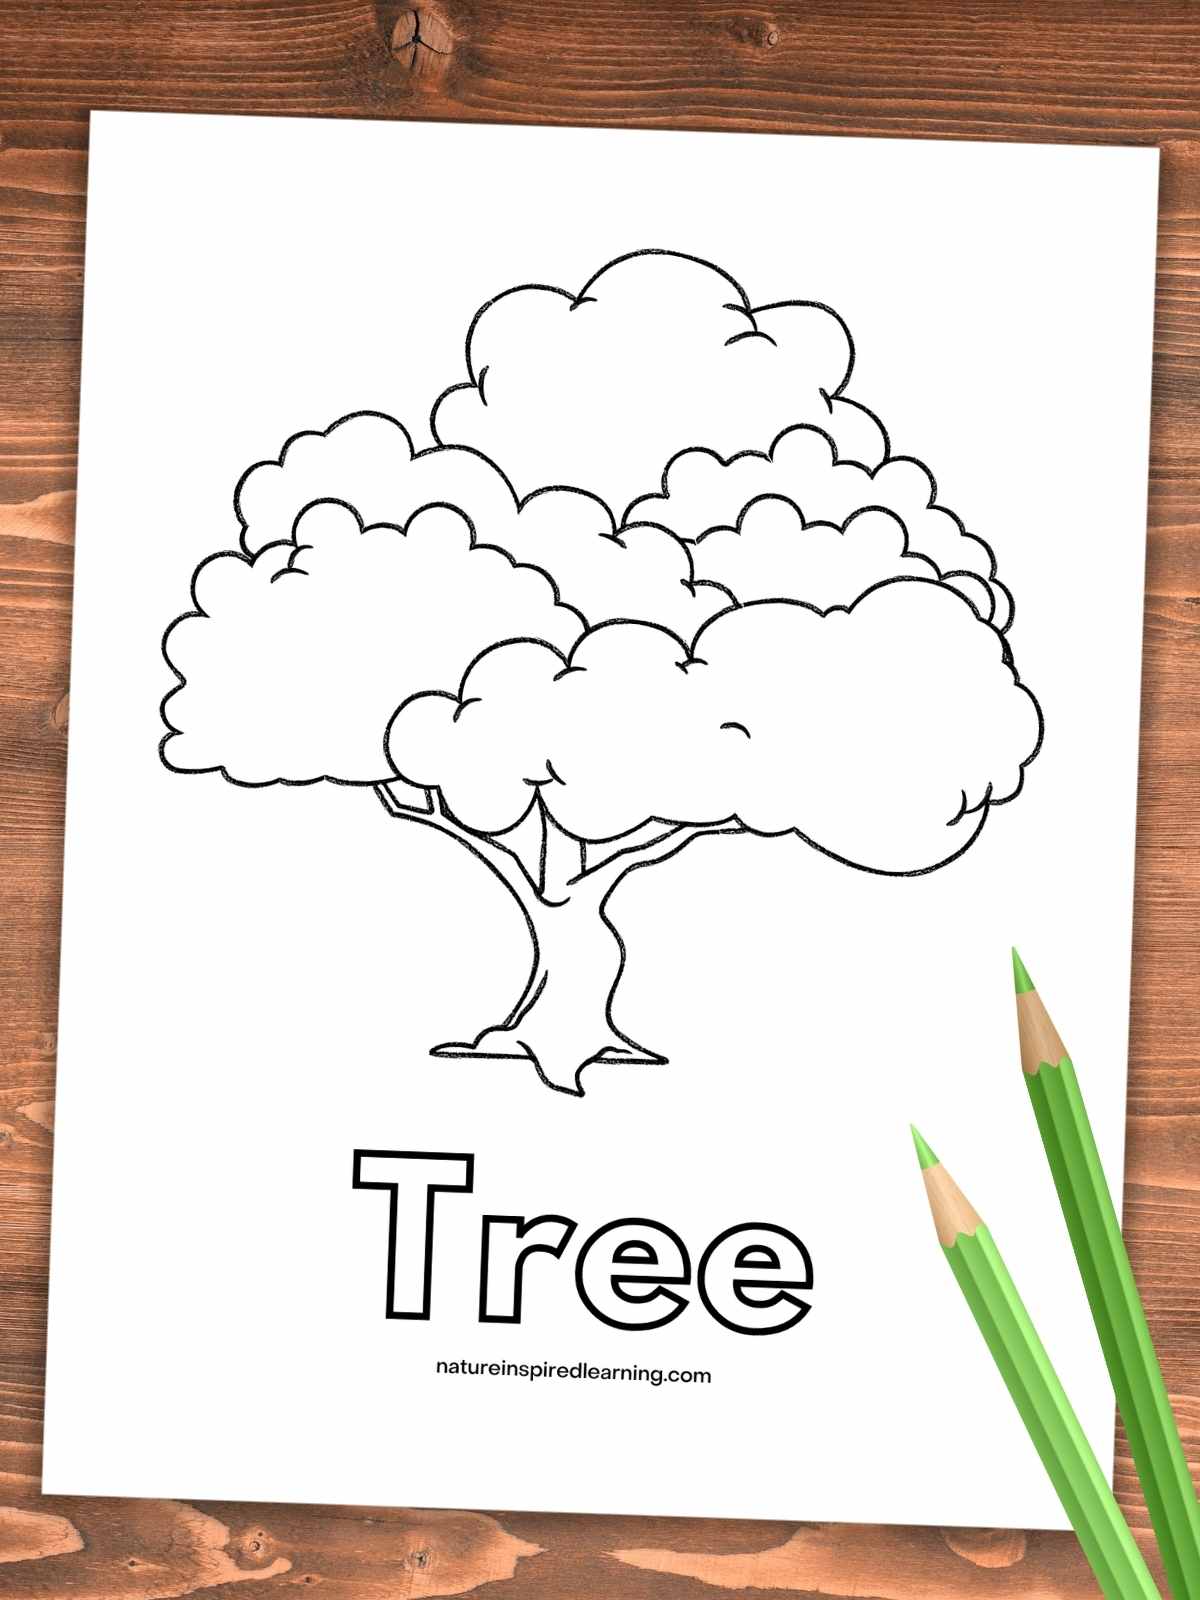 one large tree with the word Tree in bubble letters below on a wooden background with two green colored pencils bottom right